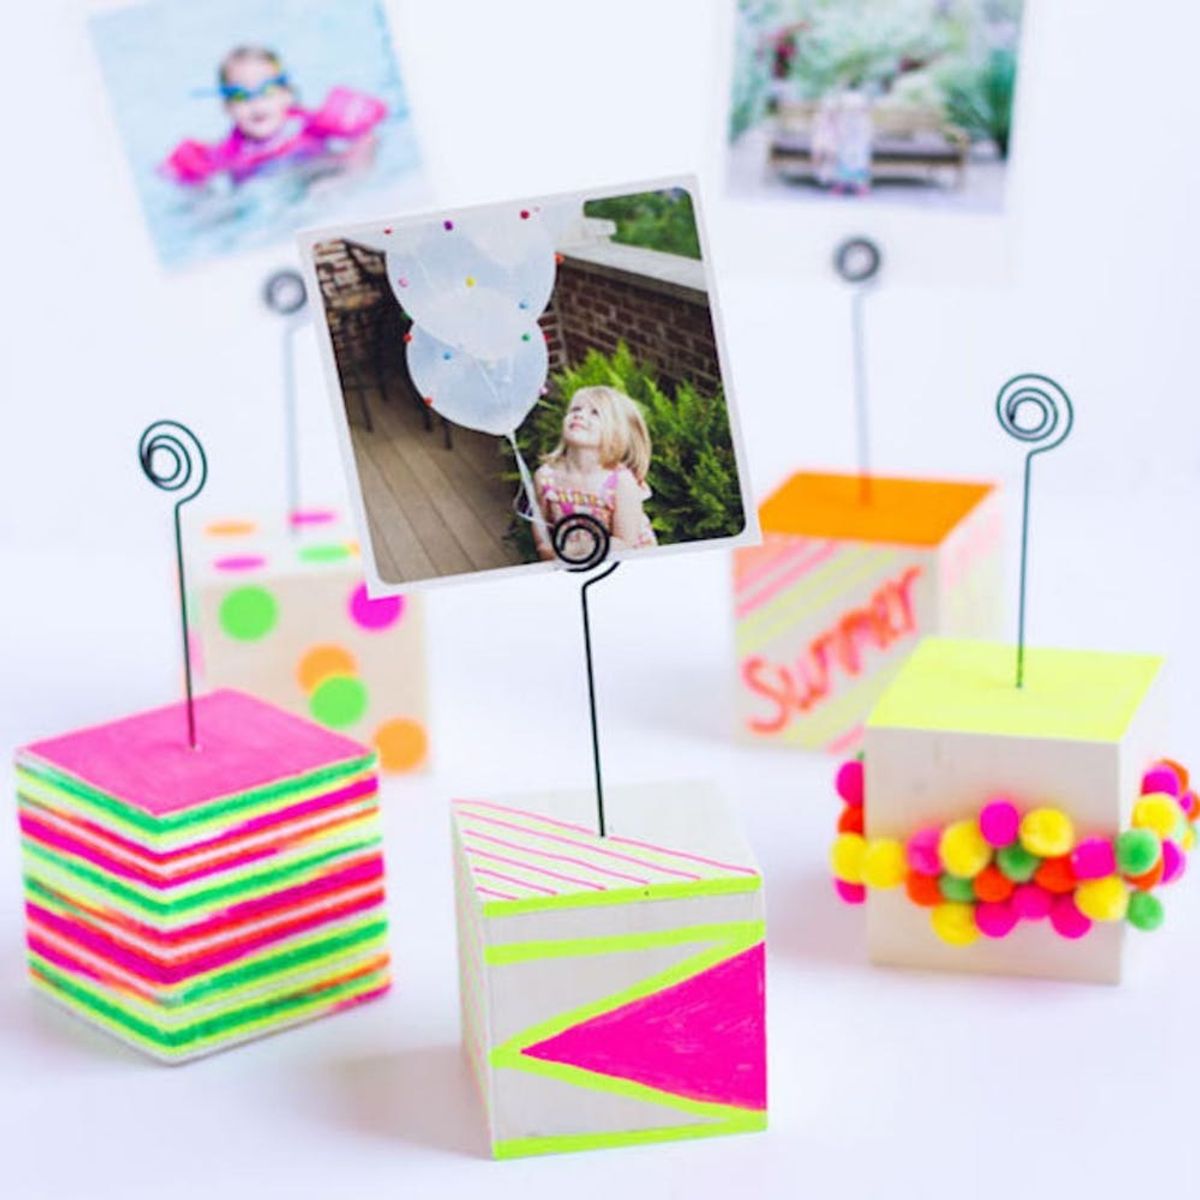 What to Make This Weekend: Instagram Photo Holders, Boozy Gummy Bears and More